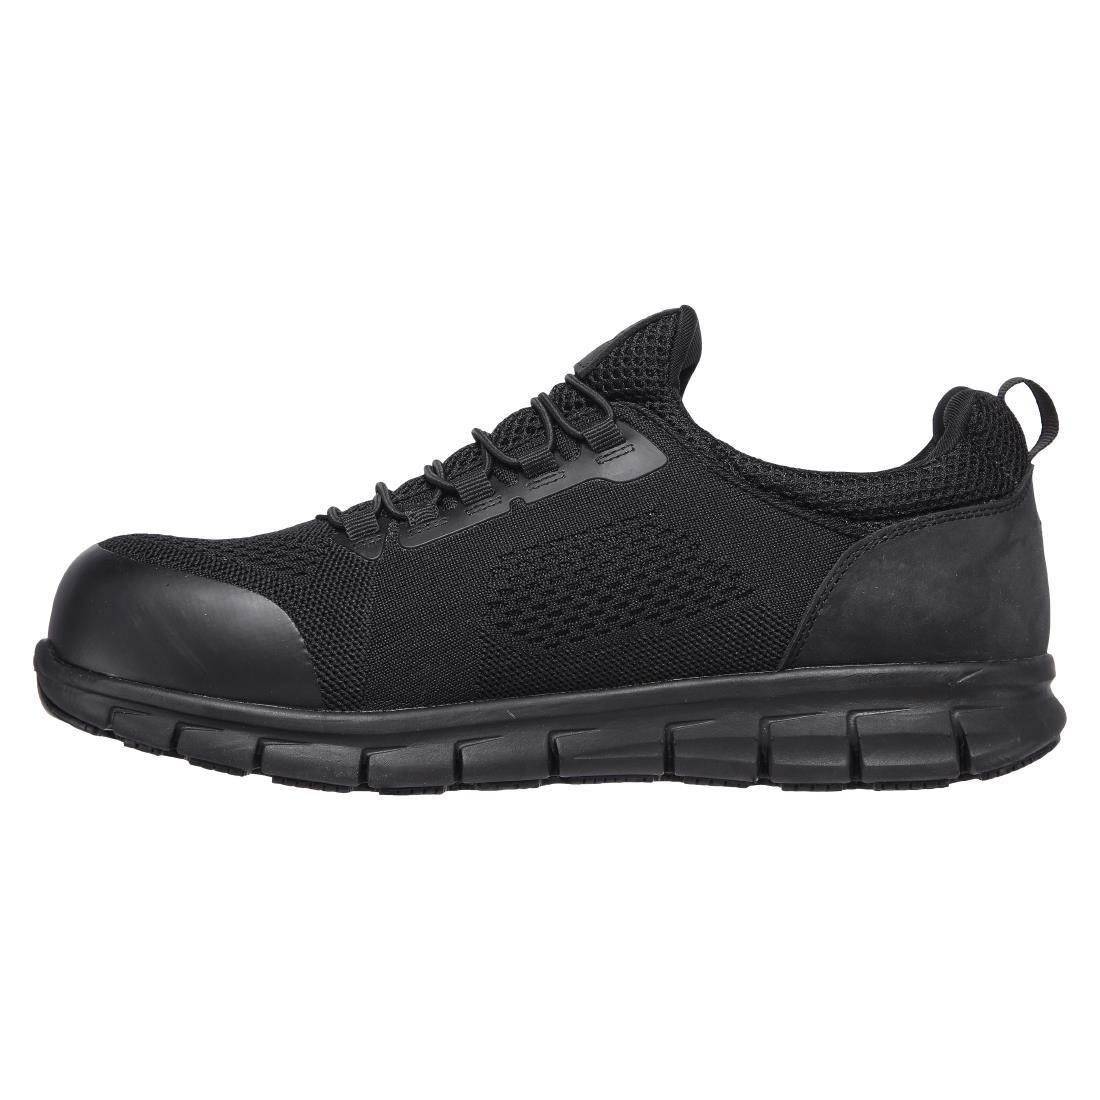 Skechers Safety Shoe with Steel Toe Cap Size 46 - BB675-46  - 2